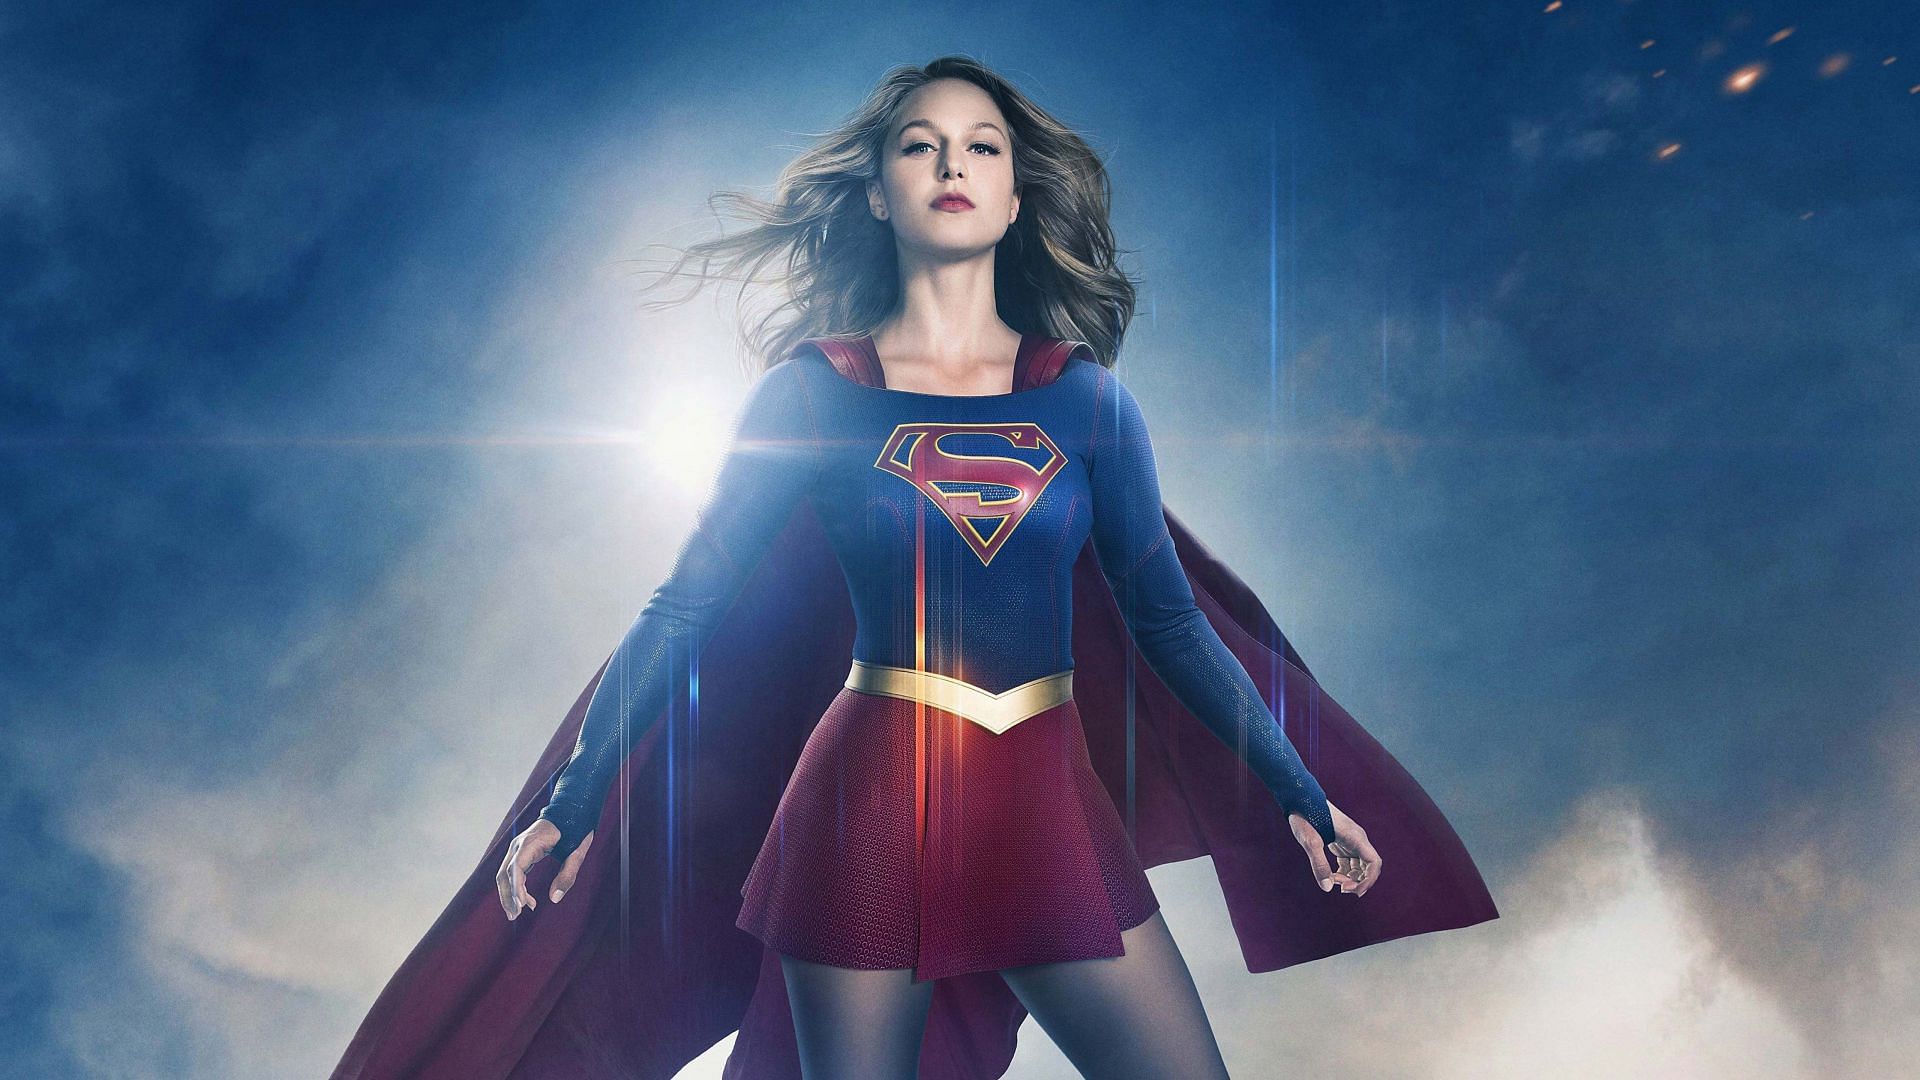 Supergirl is also an immensely powerful character who has the strength and invulnerability to stand up to and ultimately outwit the Homelander. (Image via DC)